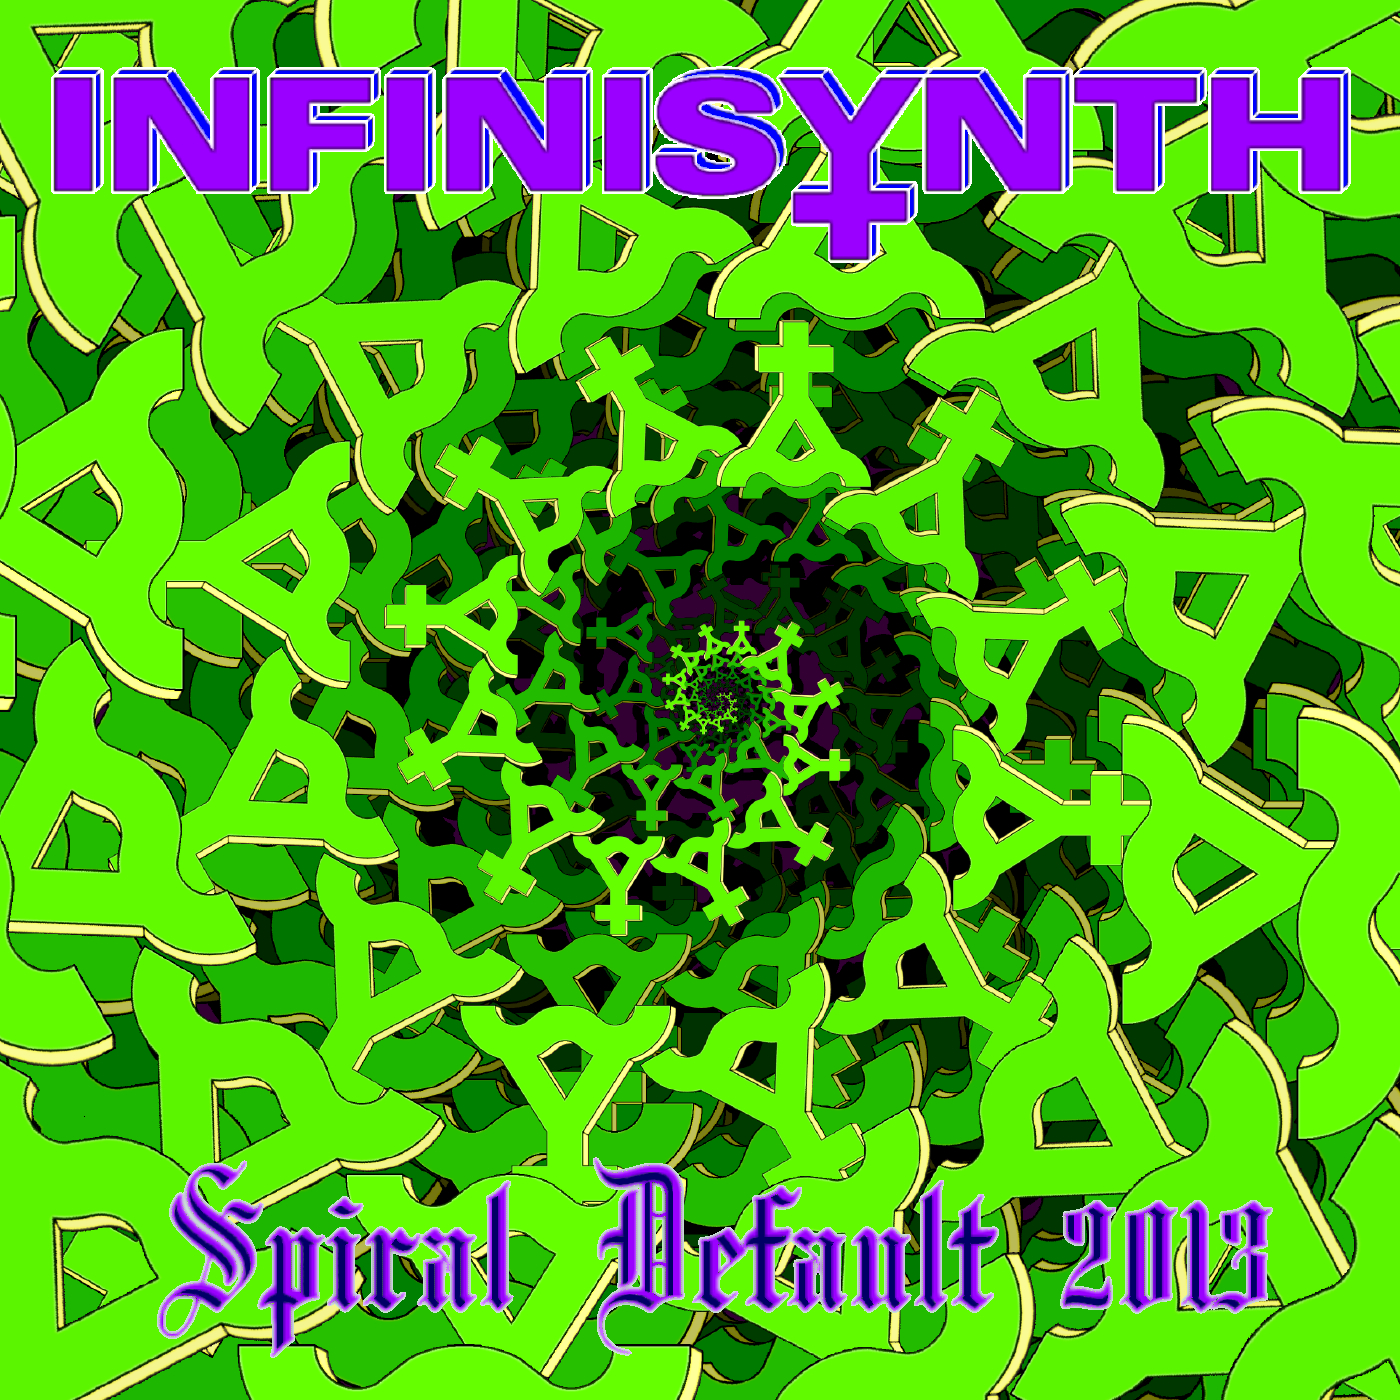 CD cover for Spiral Default 2013 from Infinisynth